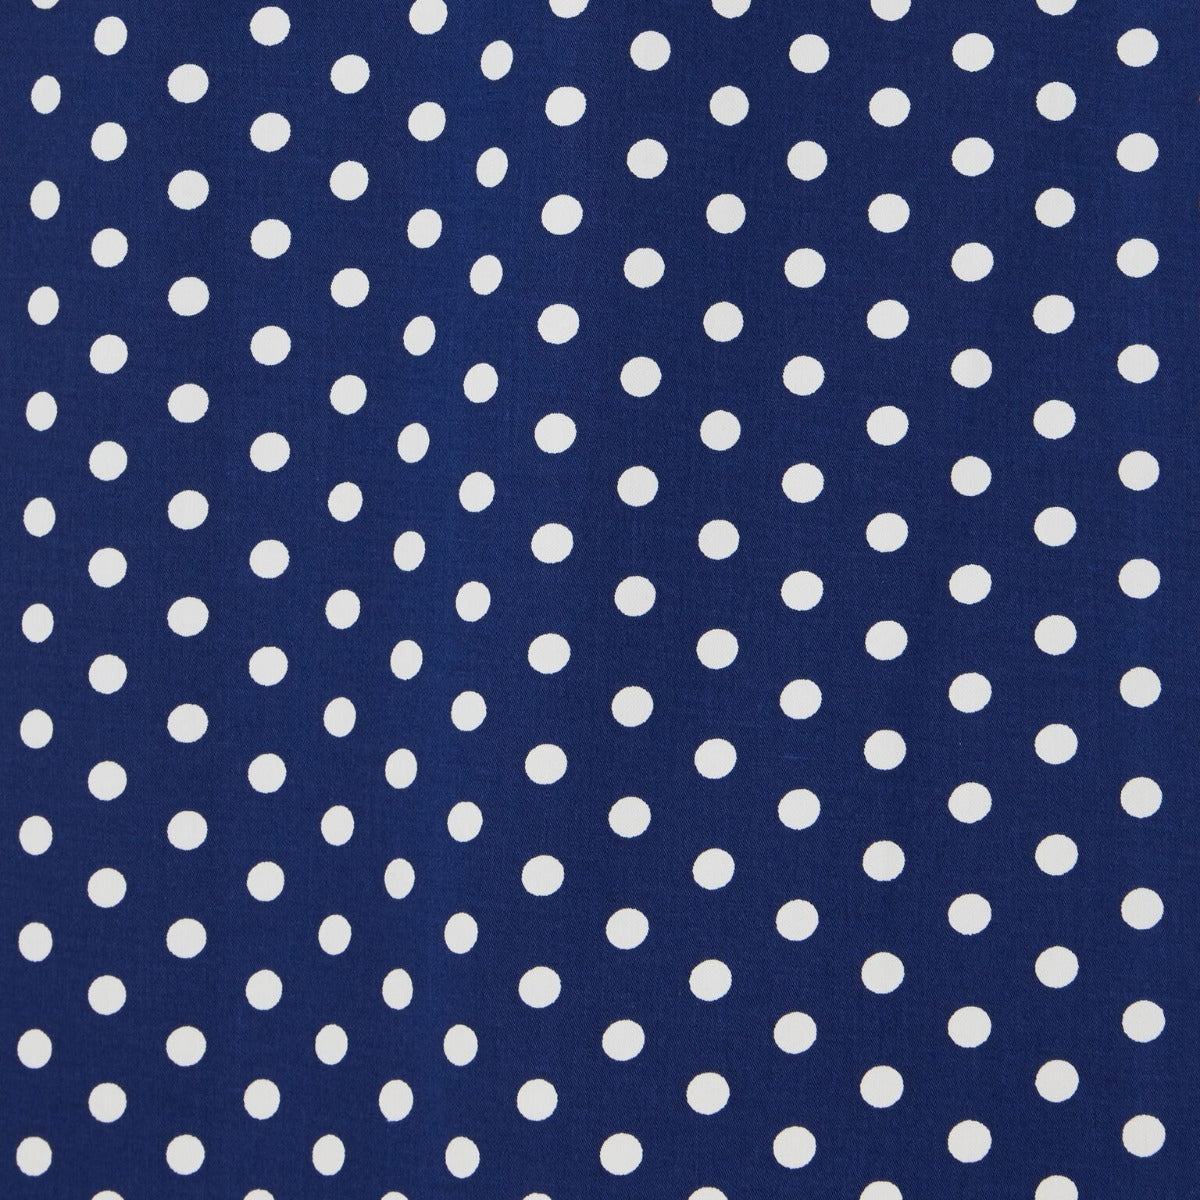 dark blue fabric, with white polka dots